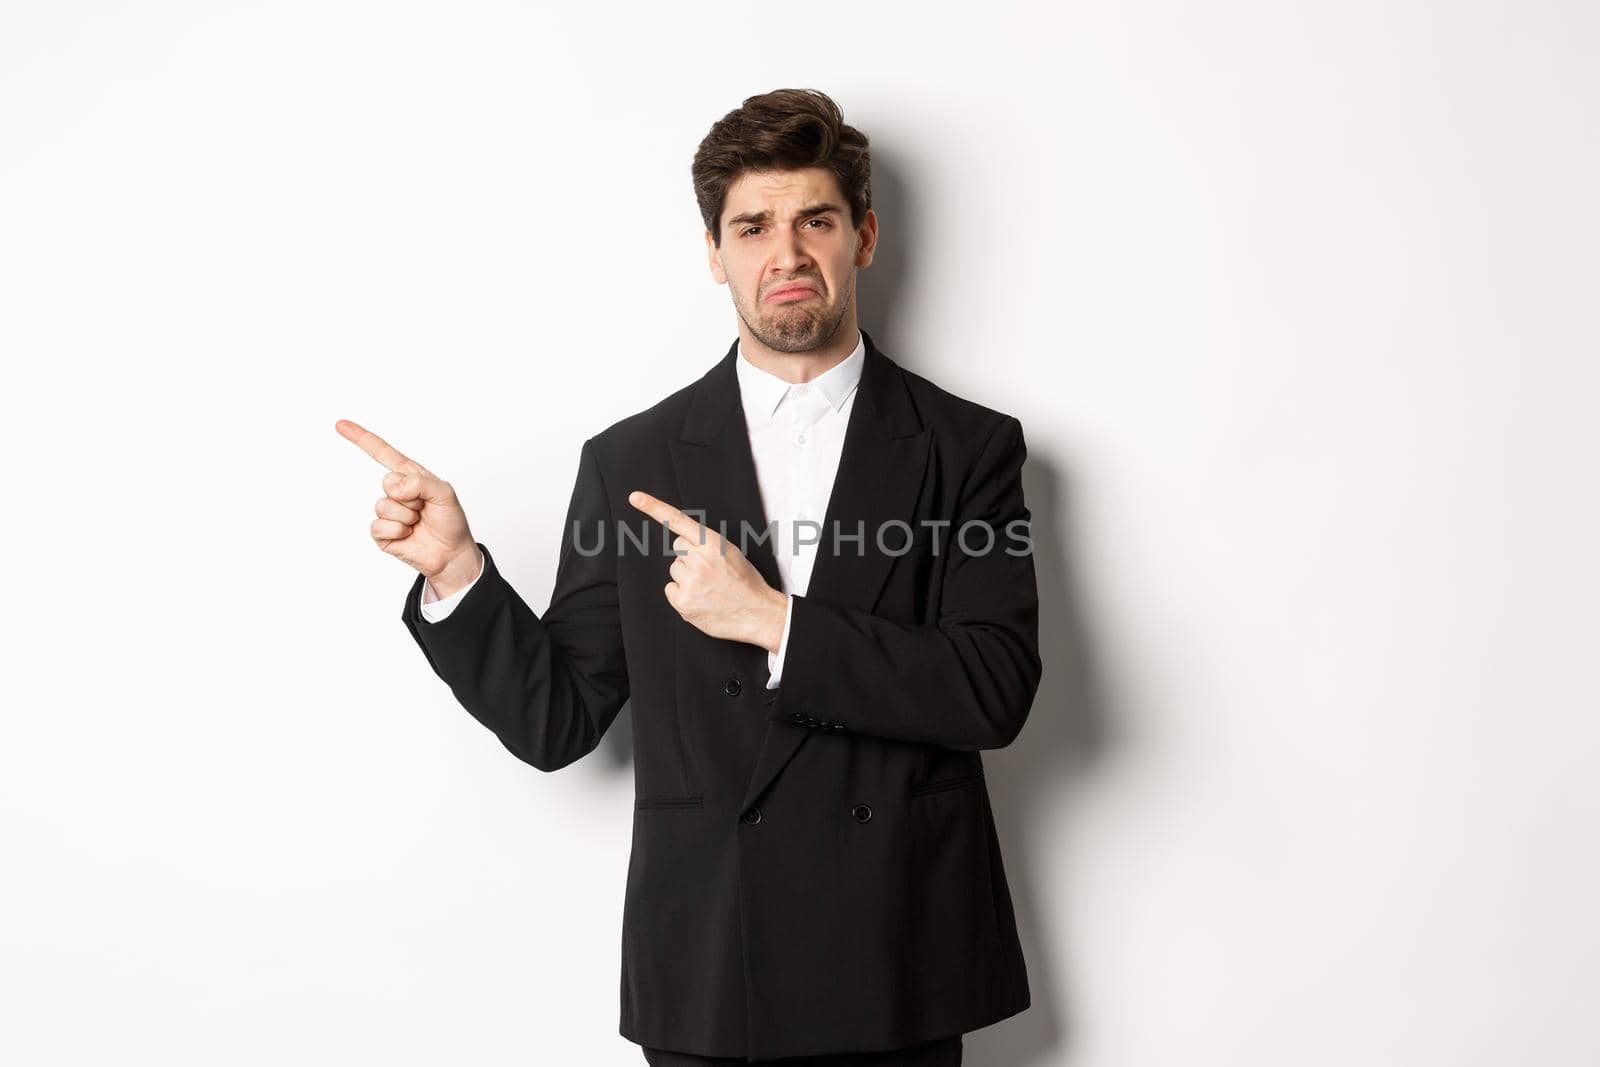 Portrait of disappointed and sad handsome businessman in suit, complaining and pointing fingers left at something bad, standing upset against white background.